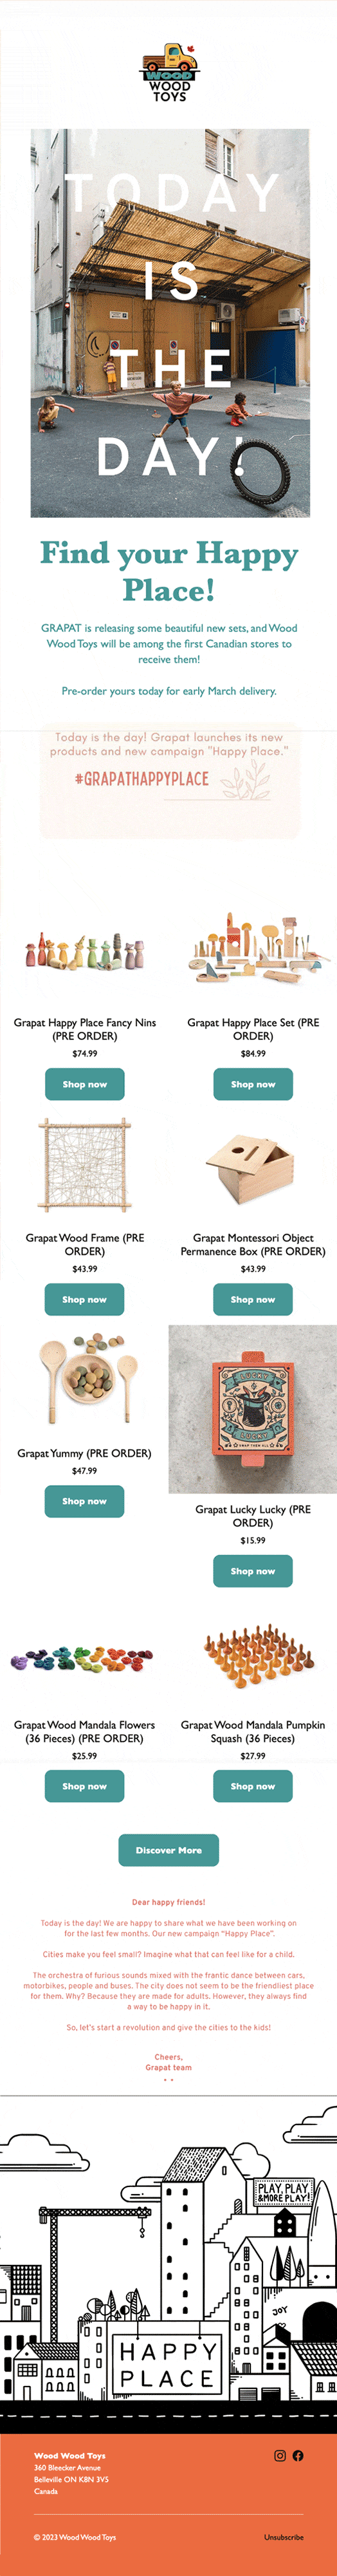 An email featuring new arrivals of beautiful wooden toy products to Wood Wood Toys' online store.